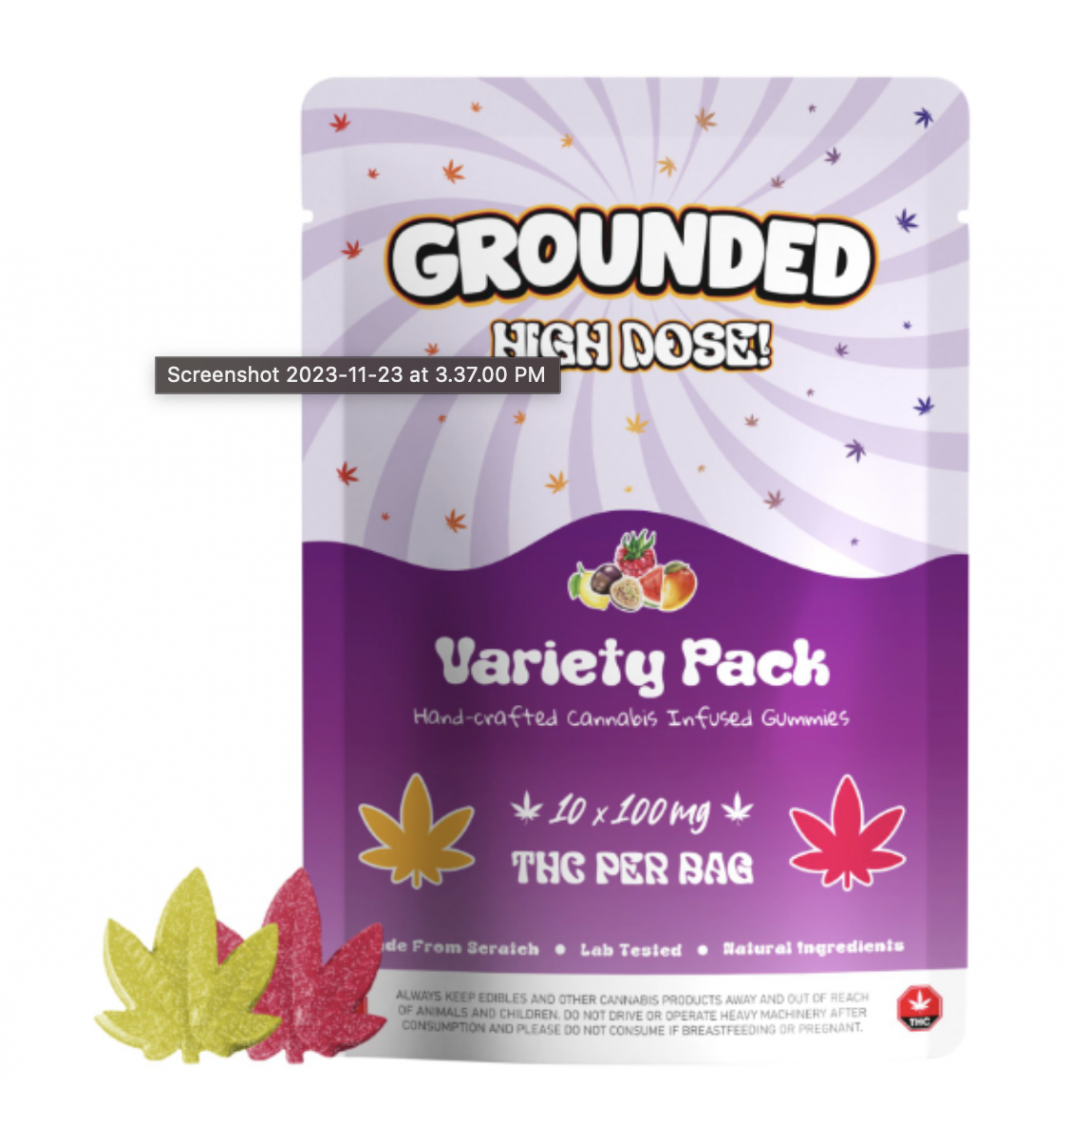 Grounded High Dose Grounded High Dose Variety Pack Gummies (1000mg THC) Edibles Gummies